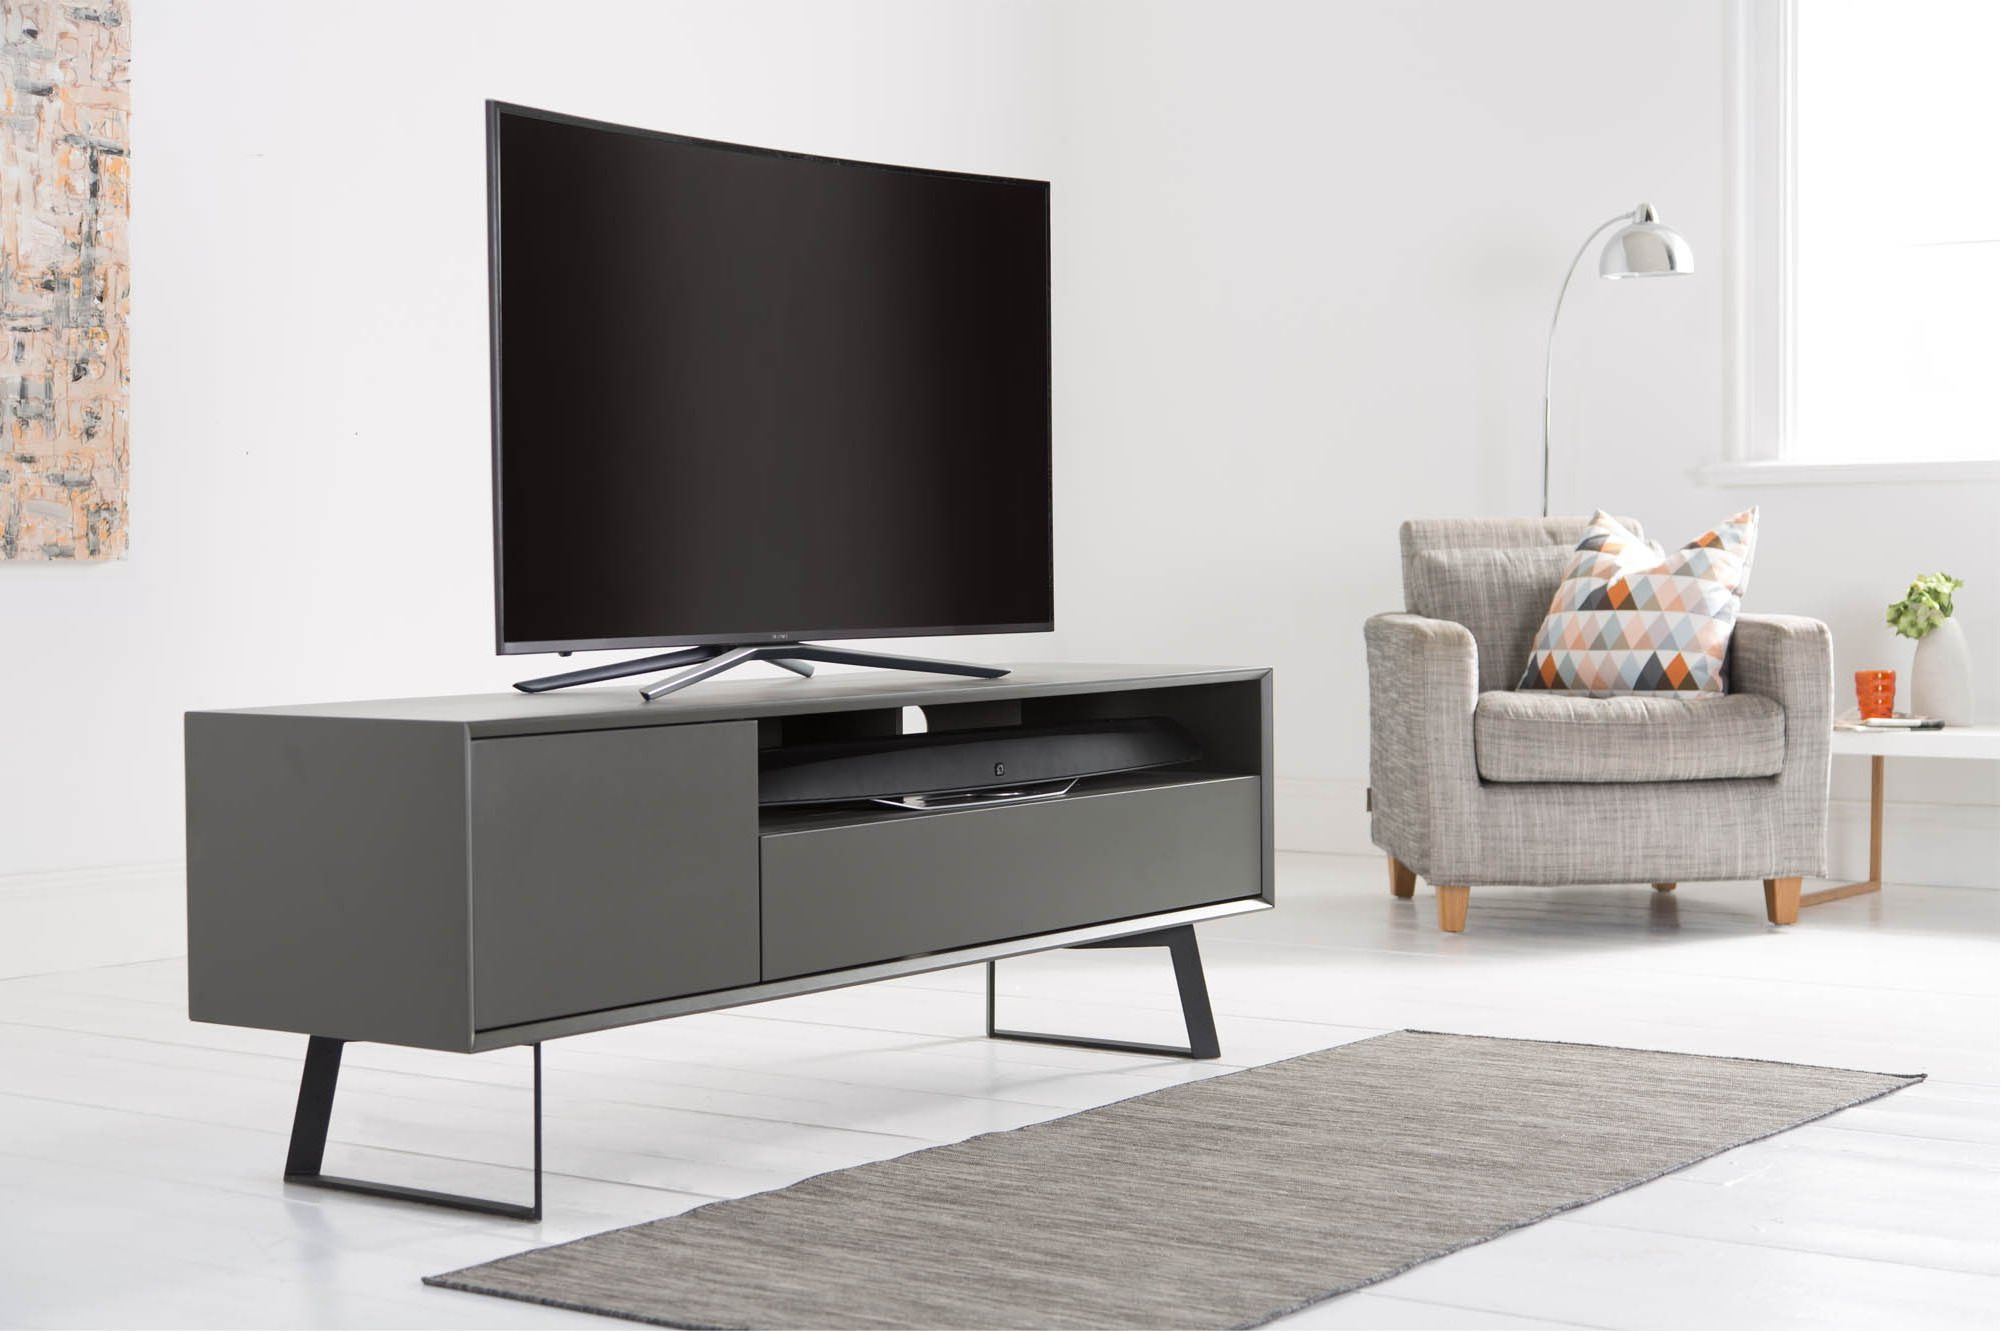 Alphason Adca1600 Gry Carbon 1600 Black And Grey Tv Stand With Regard To Carbon Wide Tv Stands (View 13 of 20)